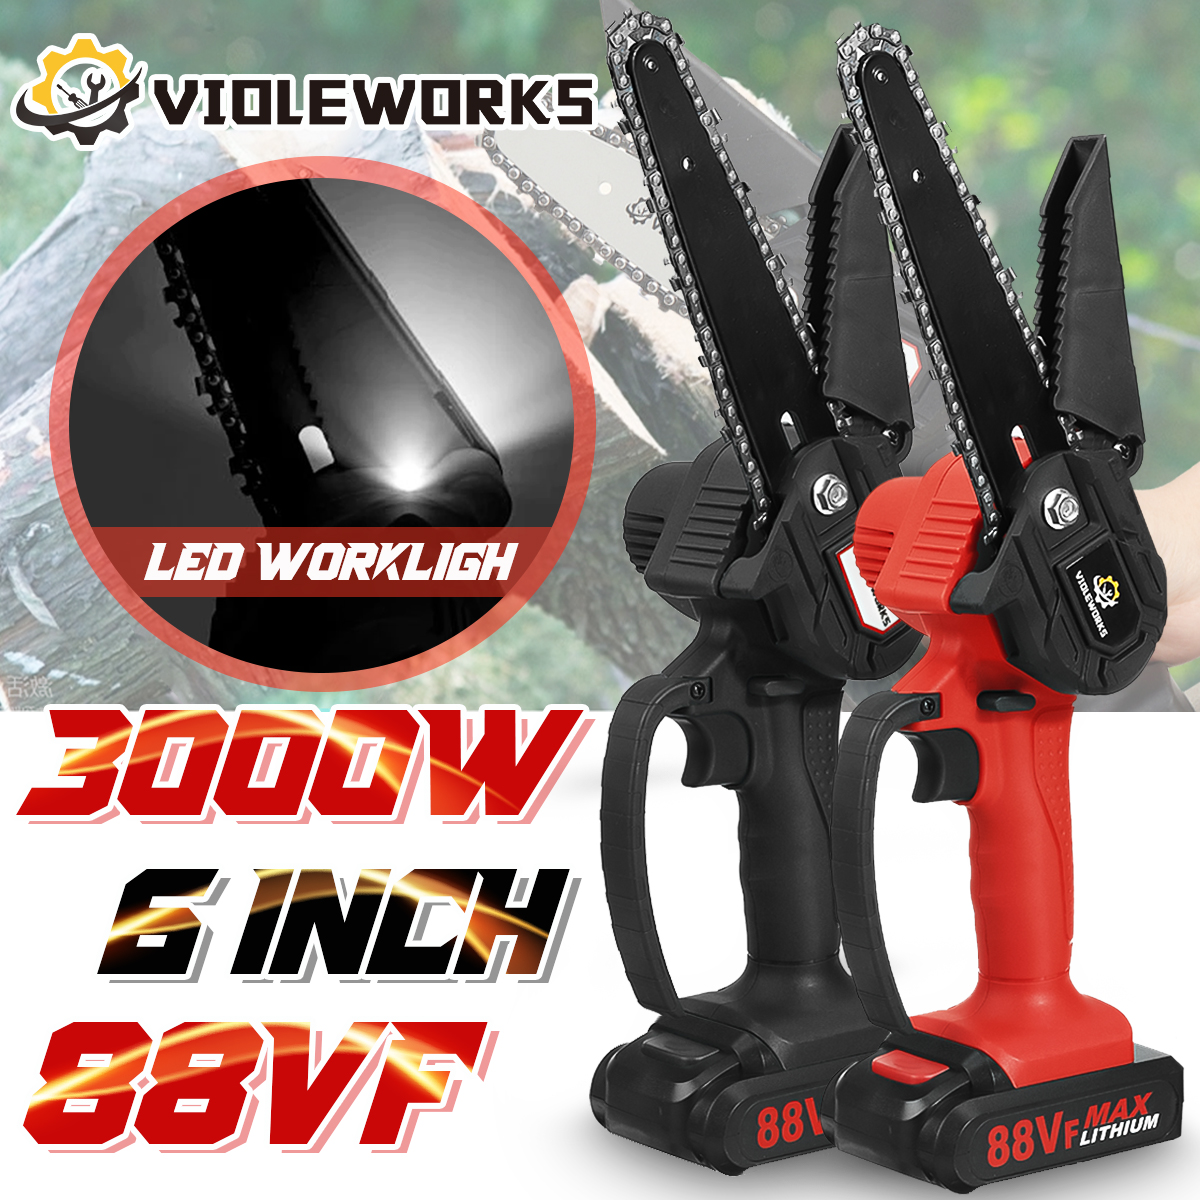 VIOLEWORKS-6-Inch-88VF-Cordless-Electric-Chain-Saw-One-Hand-Saw-LED-Woodworking-Wood-Cutter-W-12-Bat-1868927-1